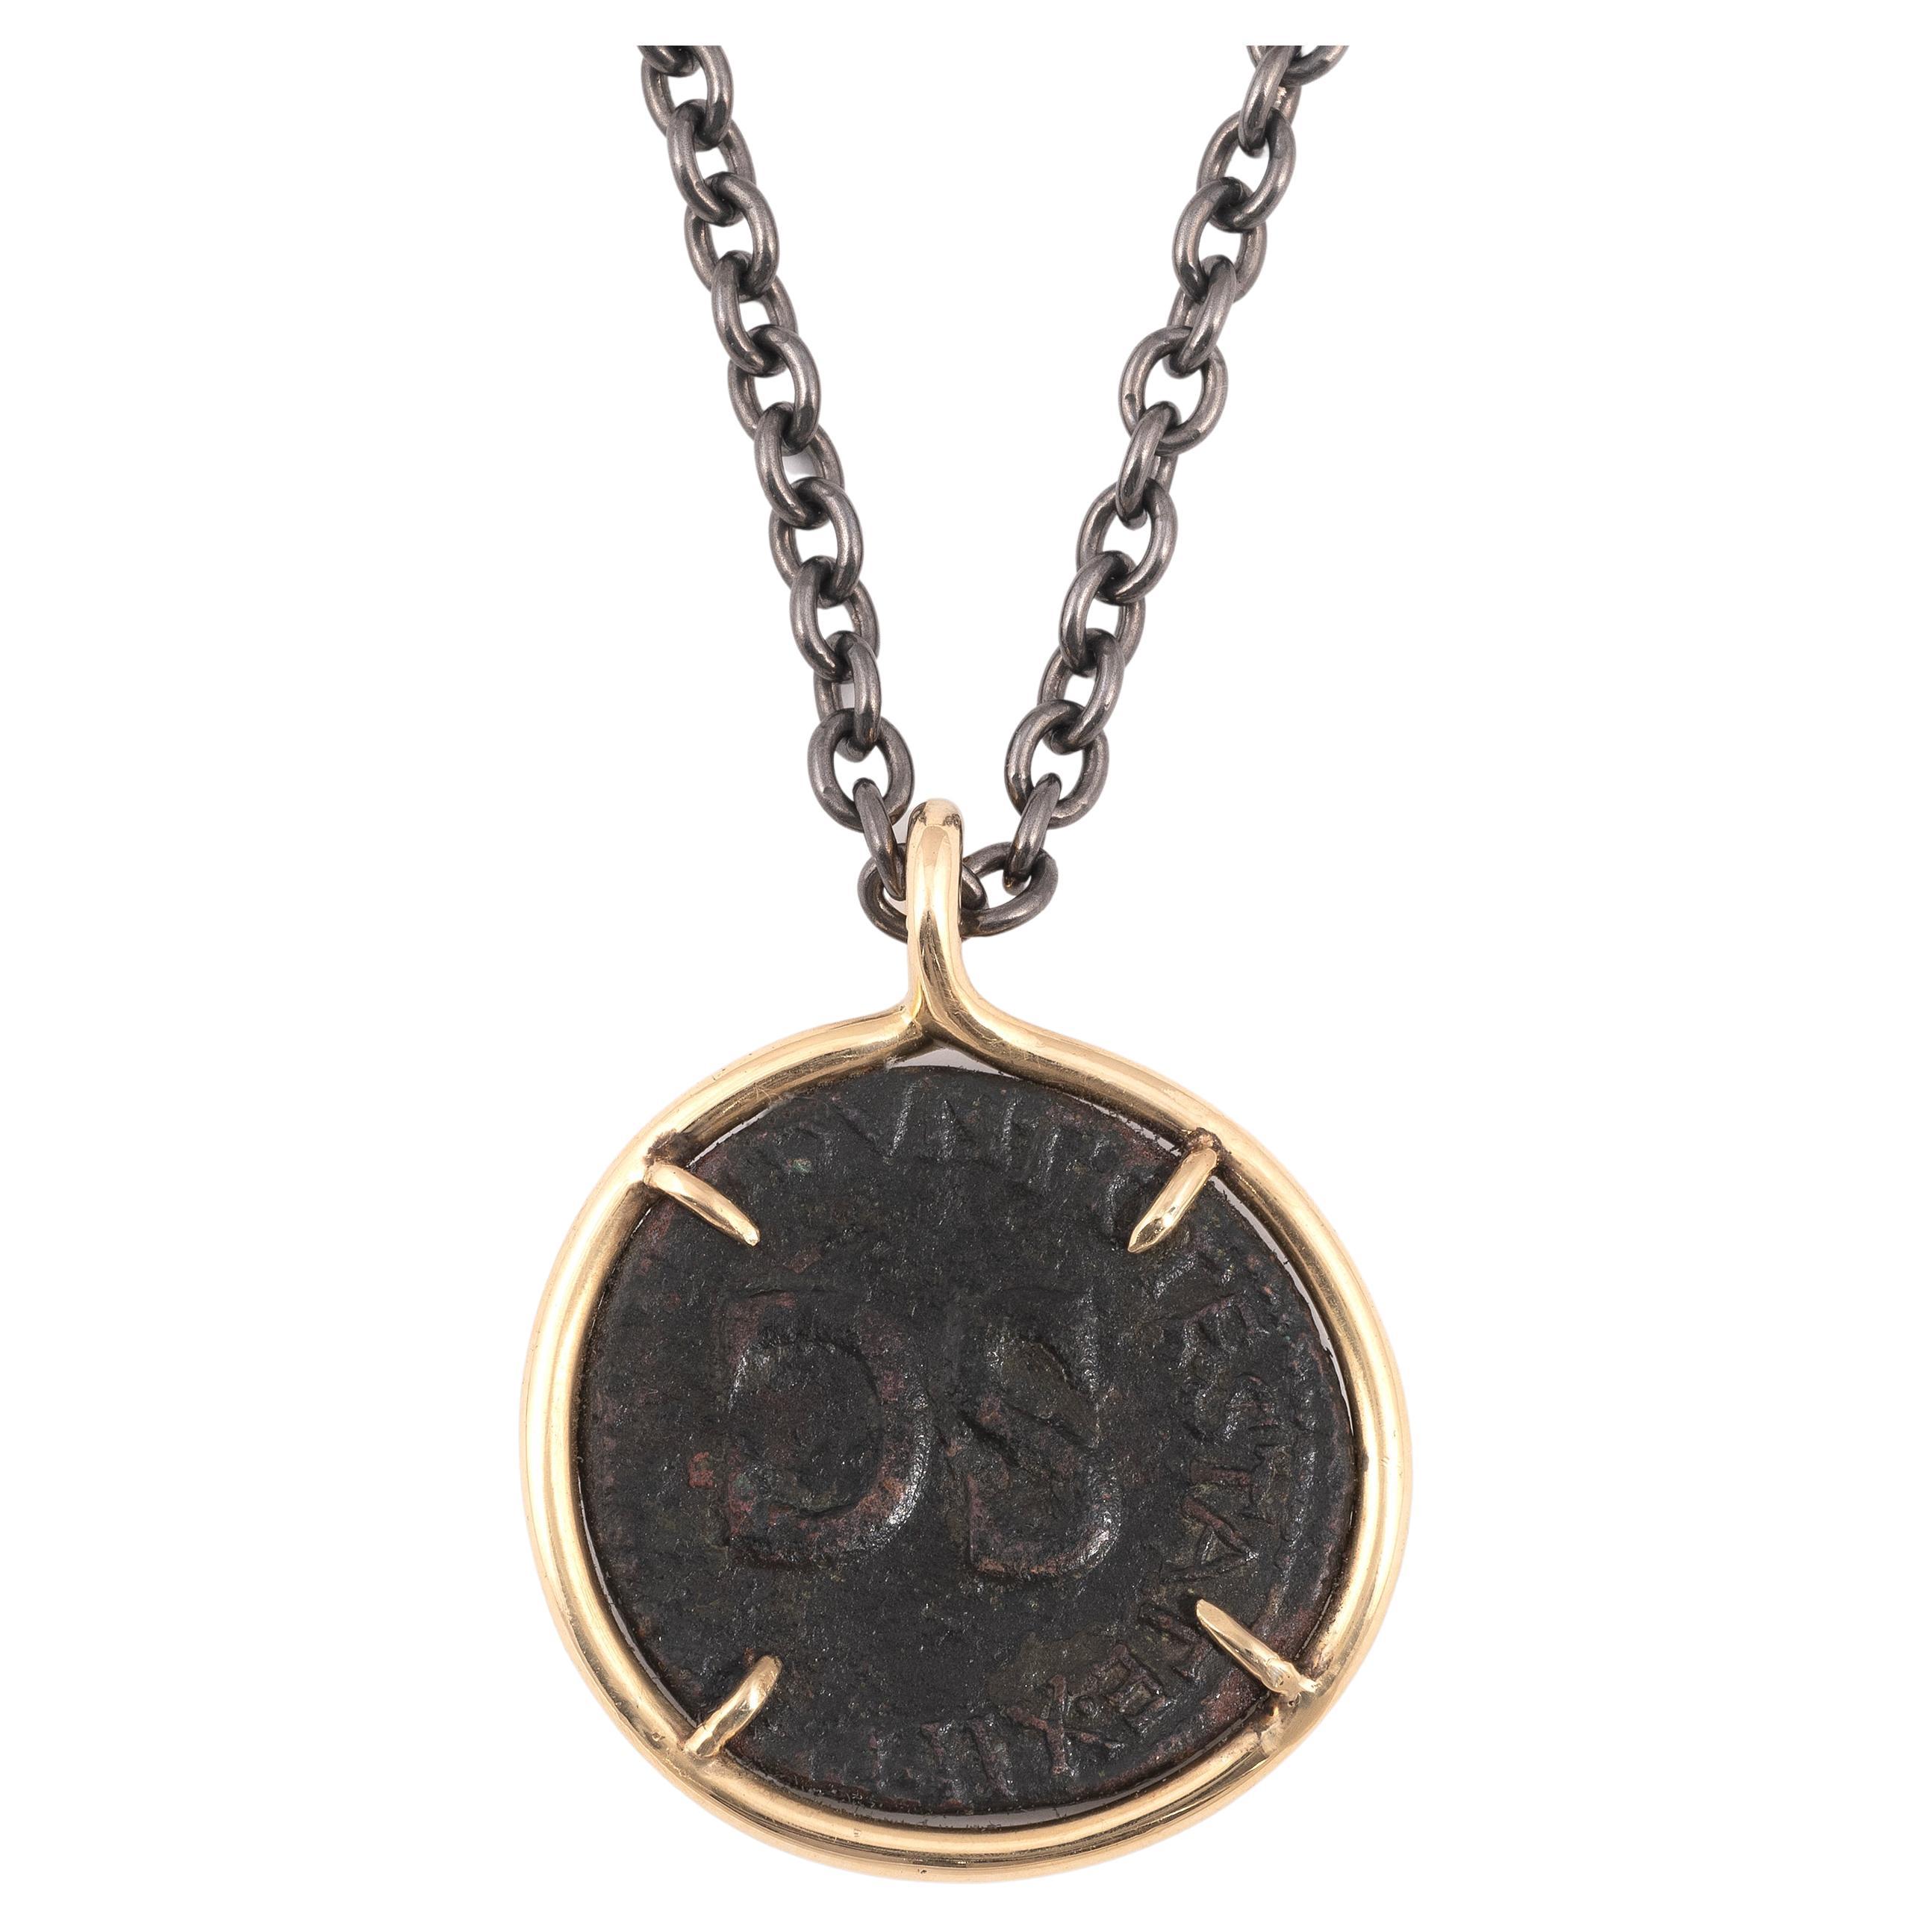 Roman Bronze Coin Tiberius 18kt Gold Pendant 37 A.C. 
On a modern black lacquered silver chain with 18K gold clasp. (Part diameter: about 2,8cm - Chain length: 59cm).
TIBERIUS (19/08/14-16/03/37) Augustus
Tiberius, the son of Tiberius Claudius Nero